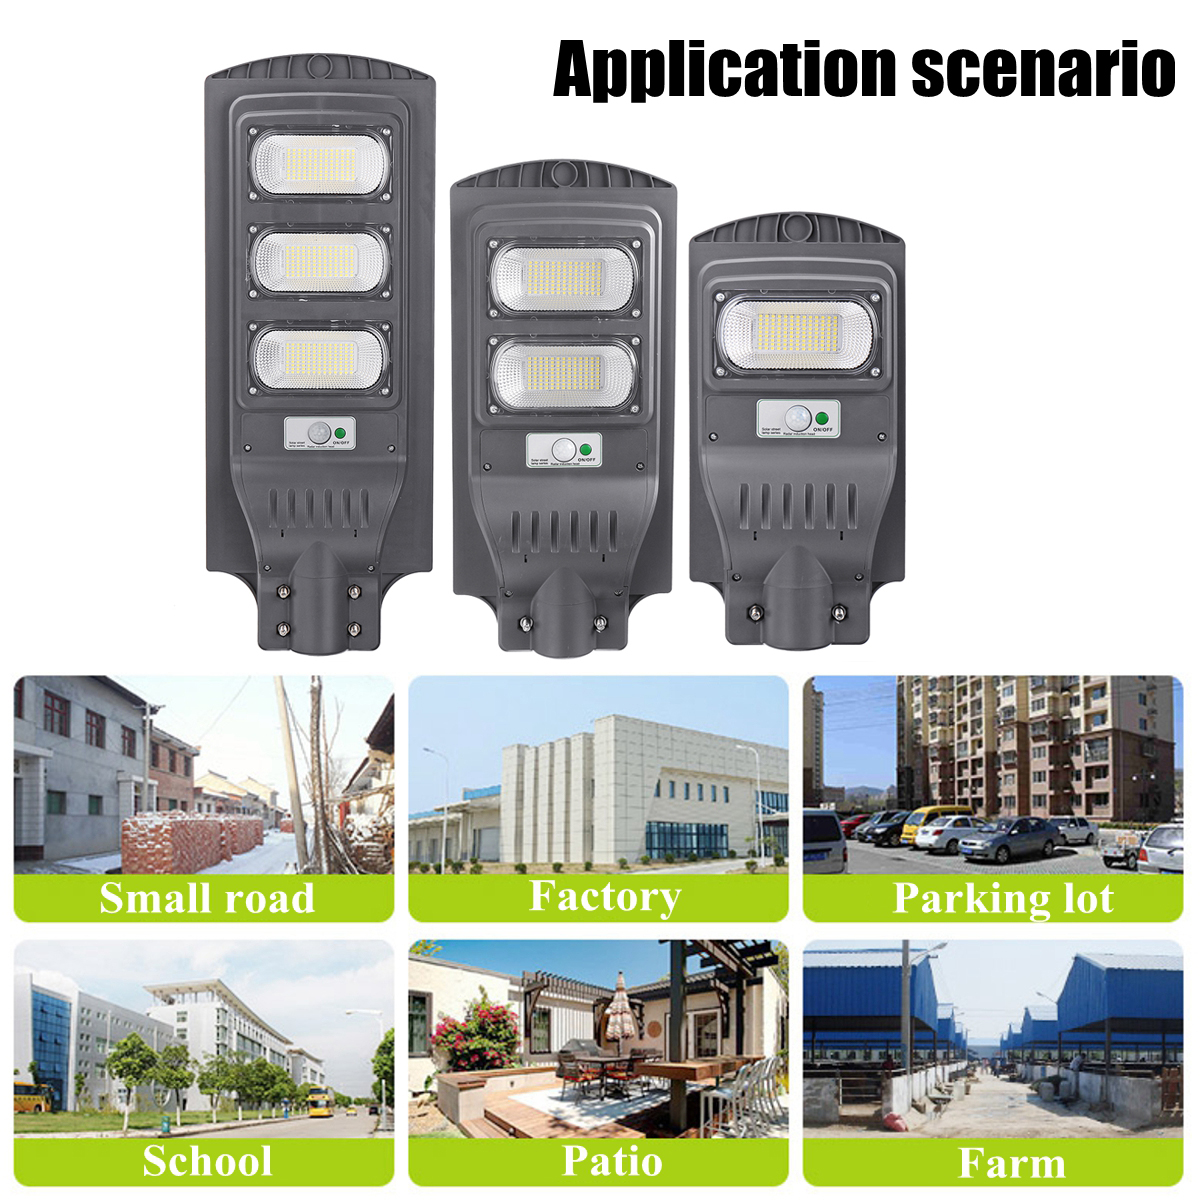 117234351-LED-Solar-Wall-Street-Light-PIR-Motion-Sensor-Outdoor-Lamp-with-Remote-Controller-1694433-9